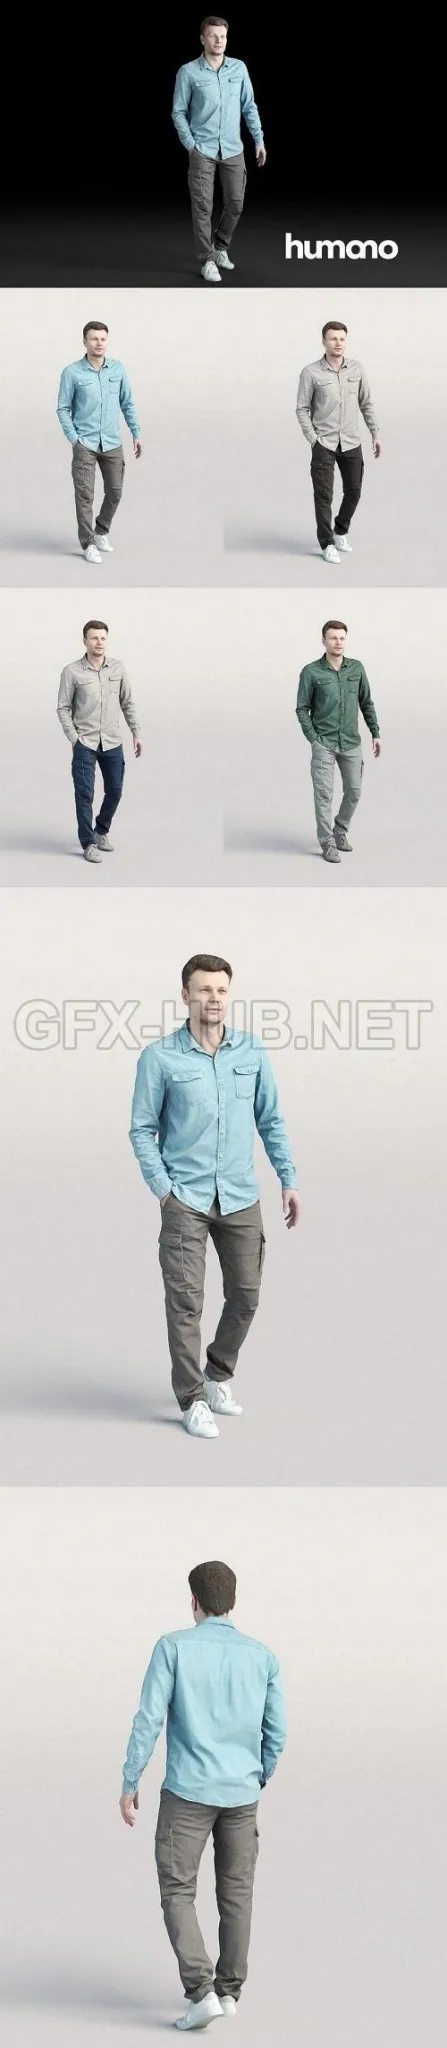 PBR Game 3D Model – Casual man in a blue shirt walking and talking